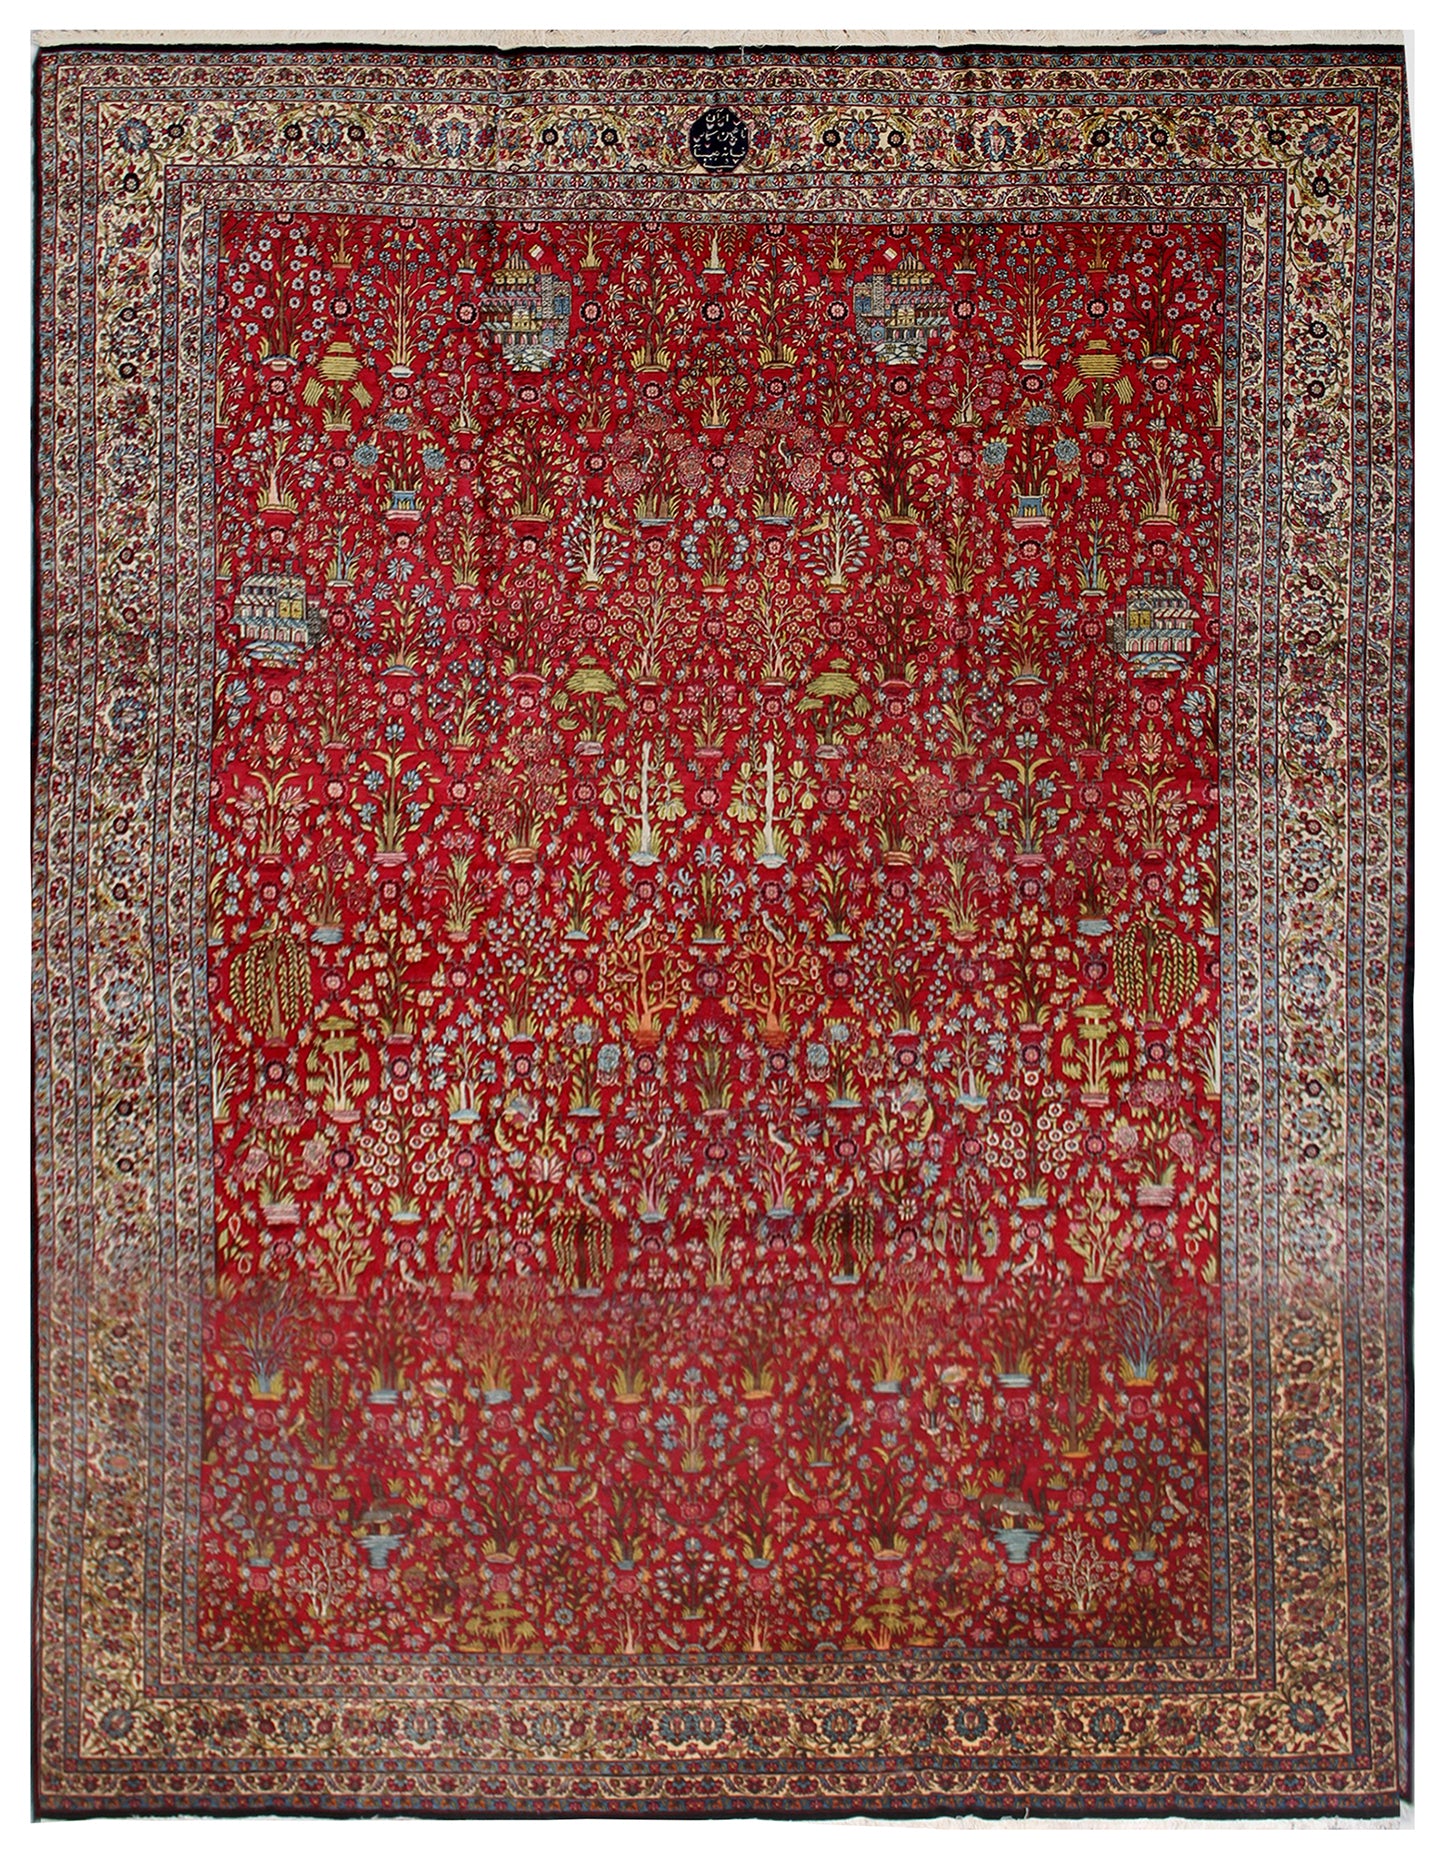 12'x16' Antique Signed Persian Rug